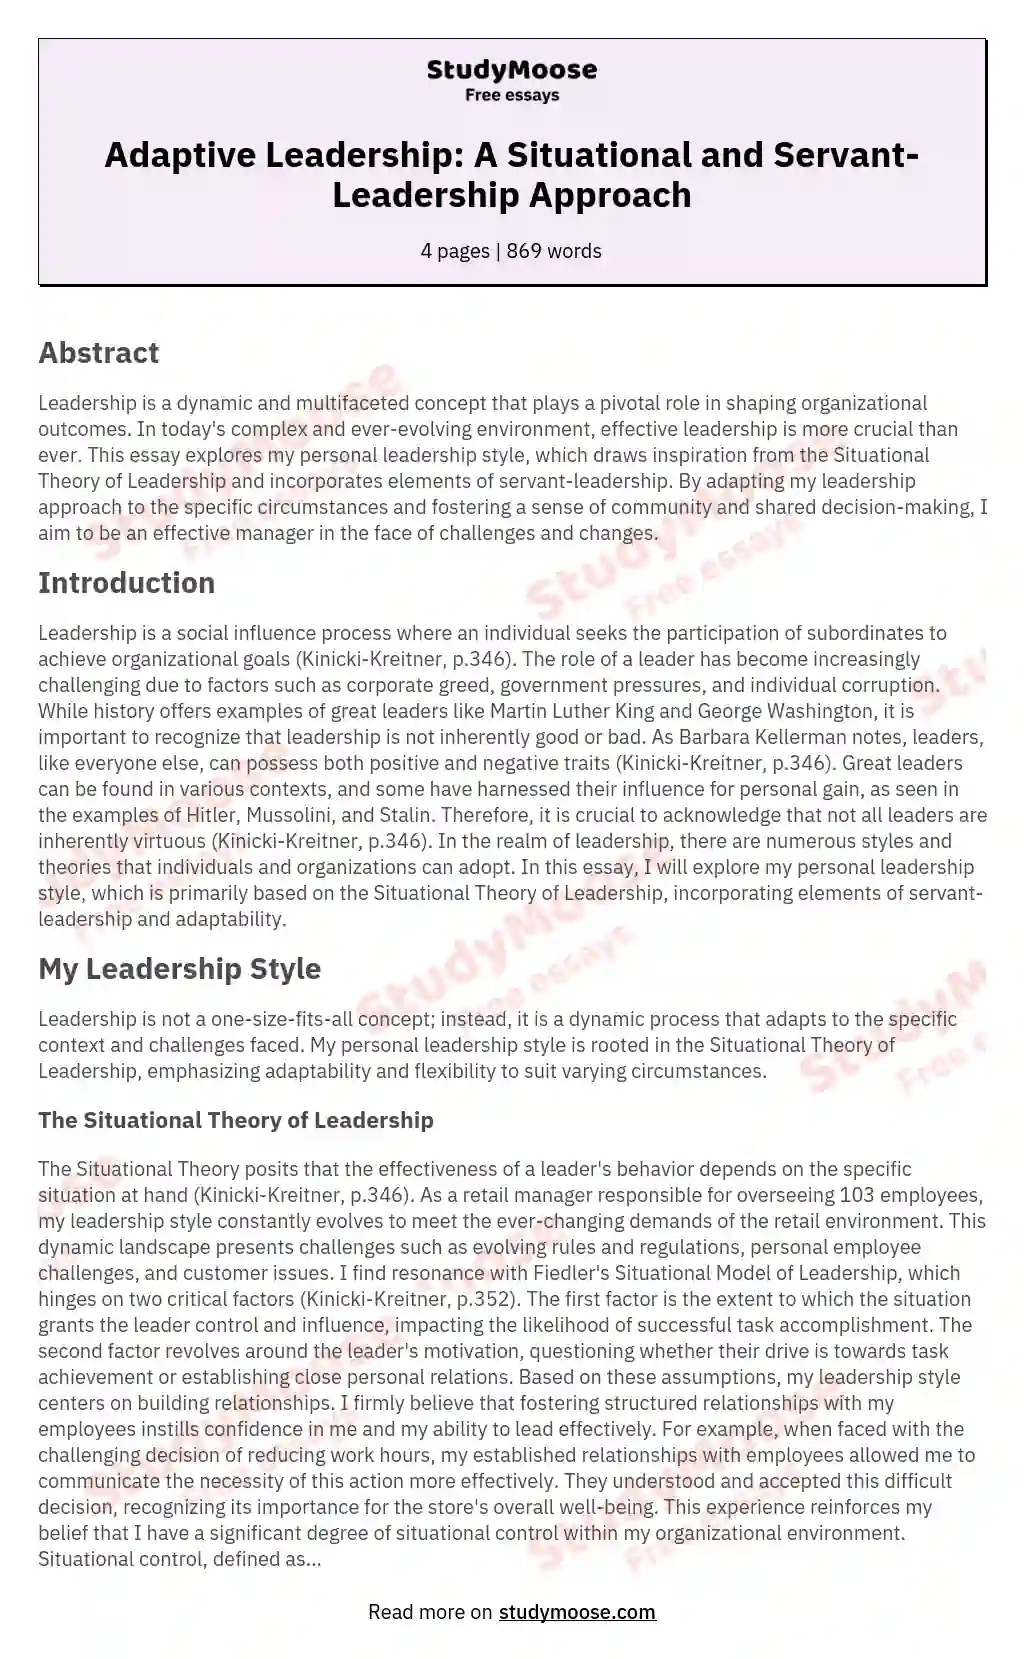 Adaptive Leadership: A Situational and Servant-Leadership Approach essay